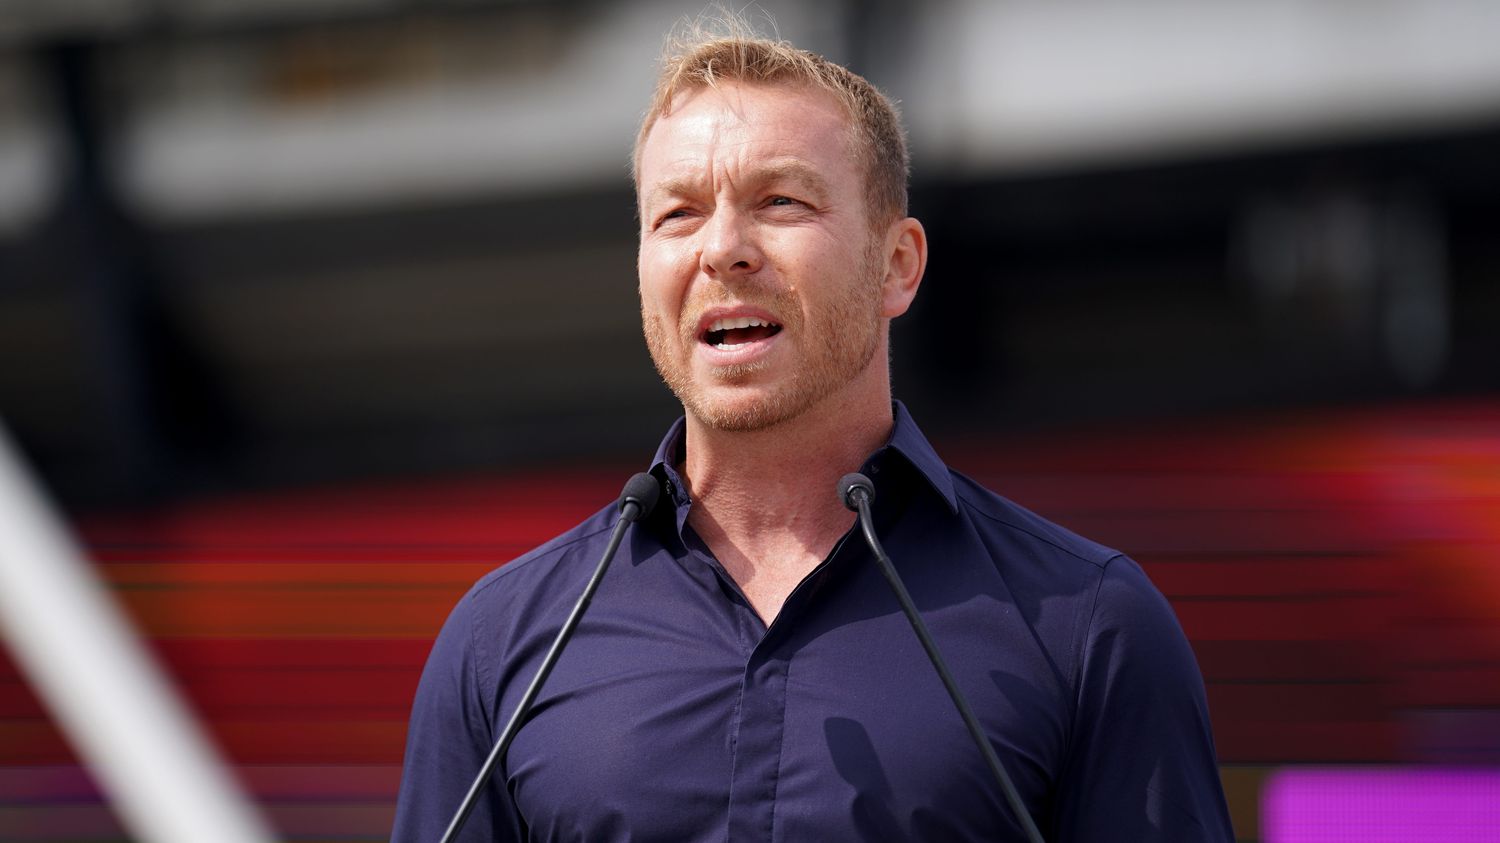 Track cycling: Six-time Olympic champion Chris Hoy announces he has cancer